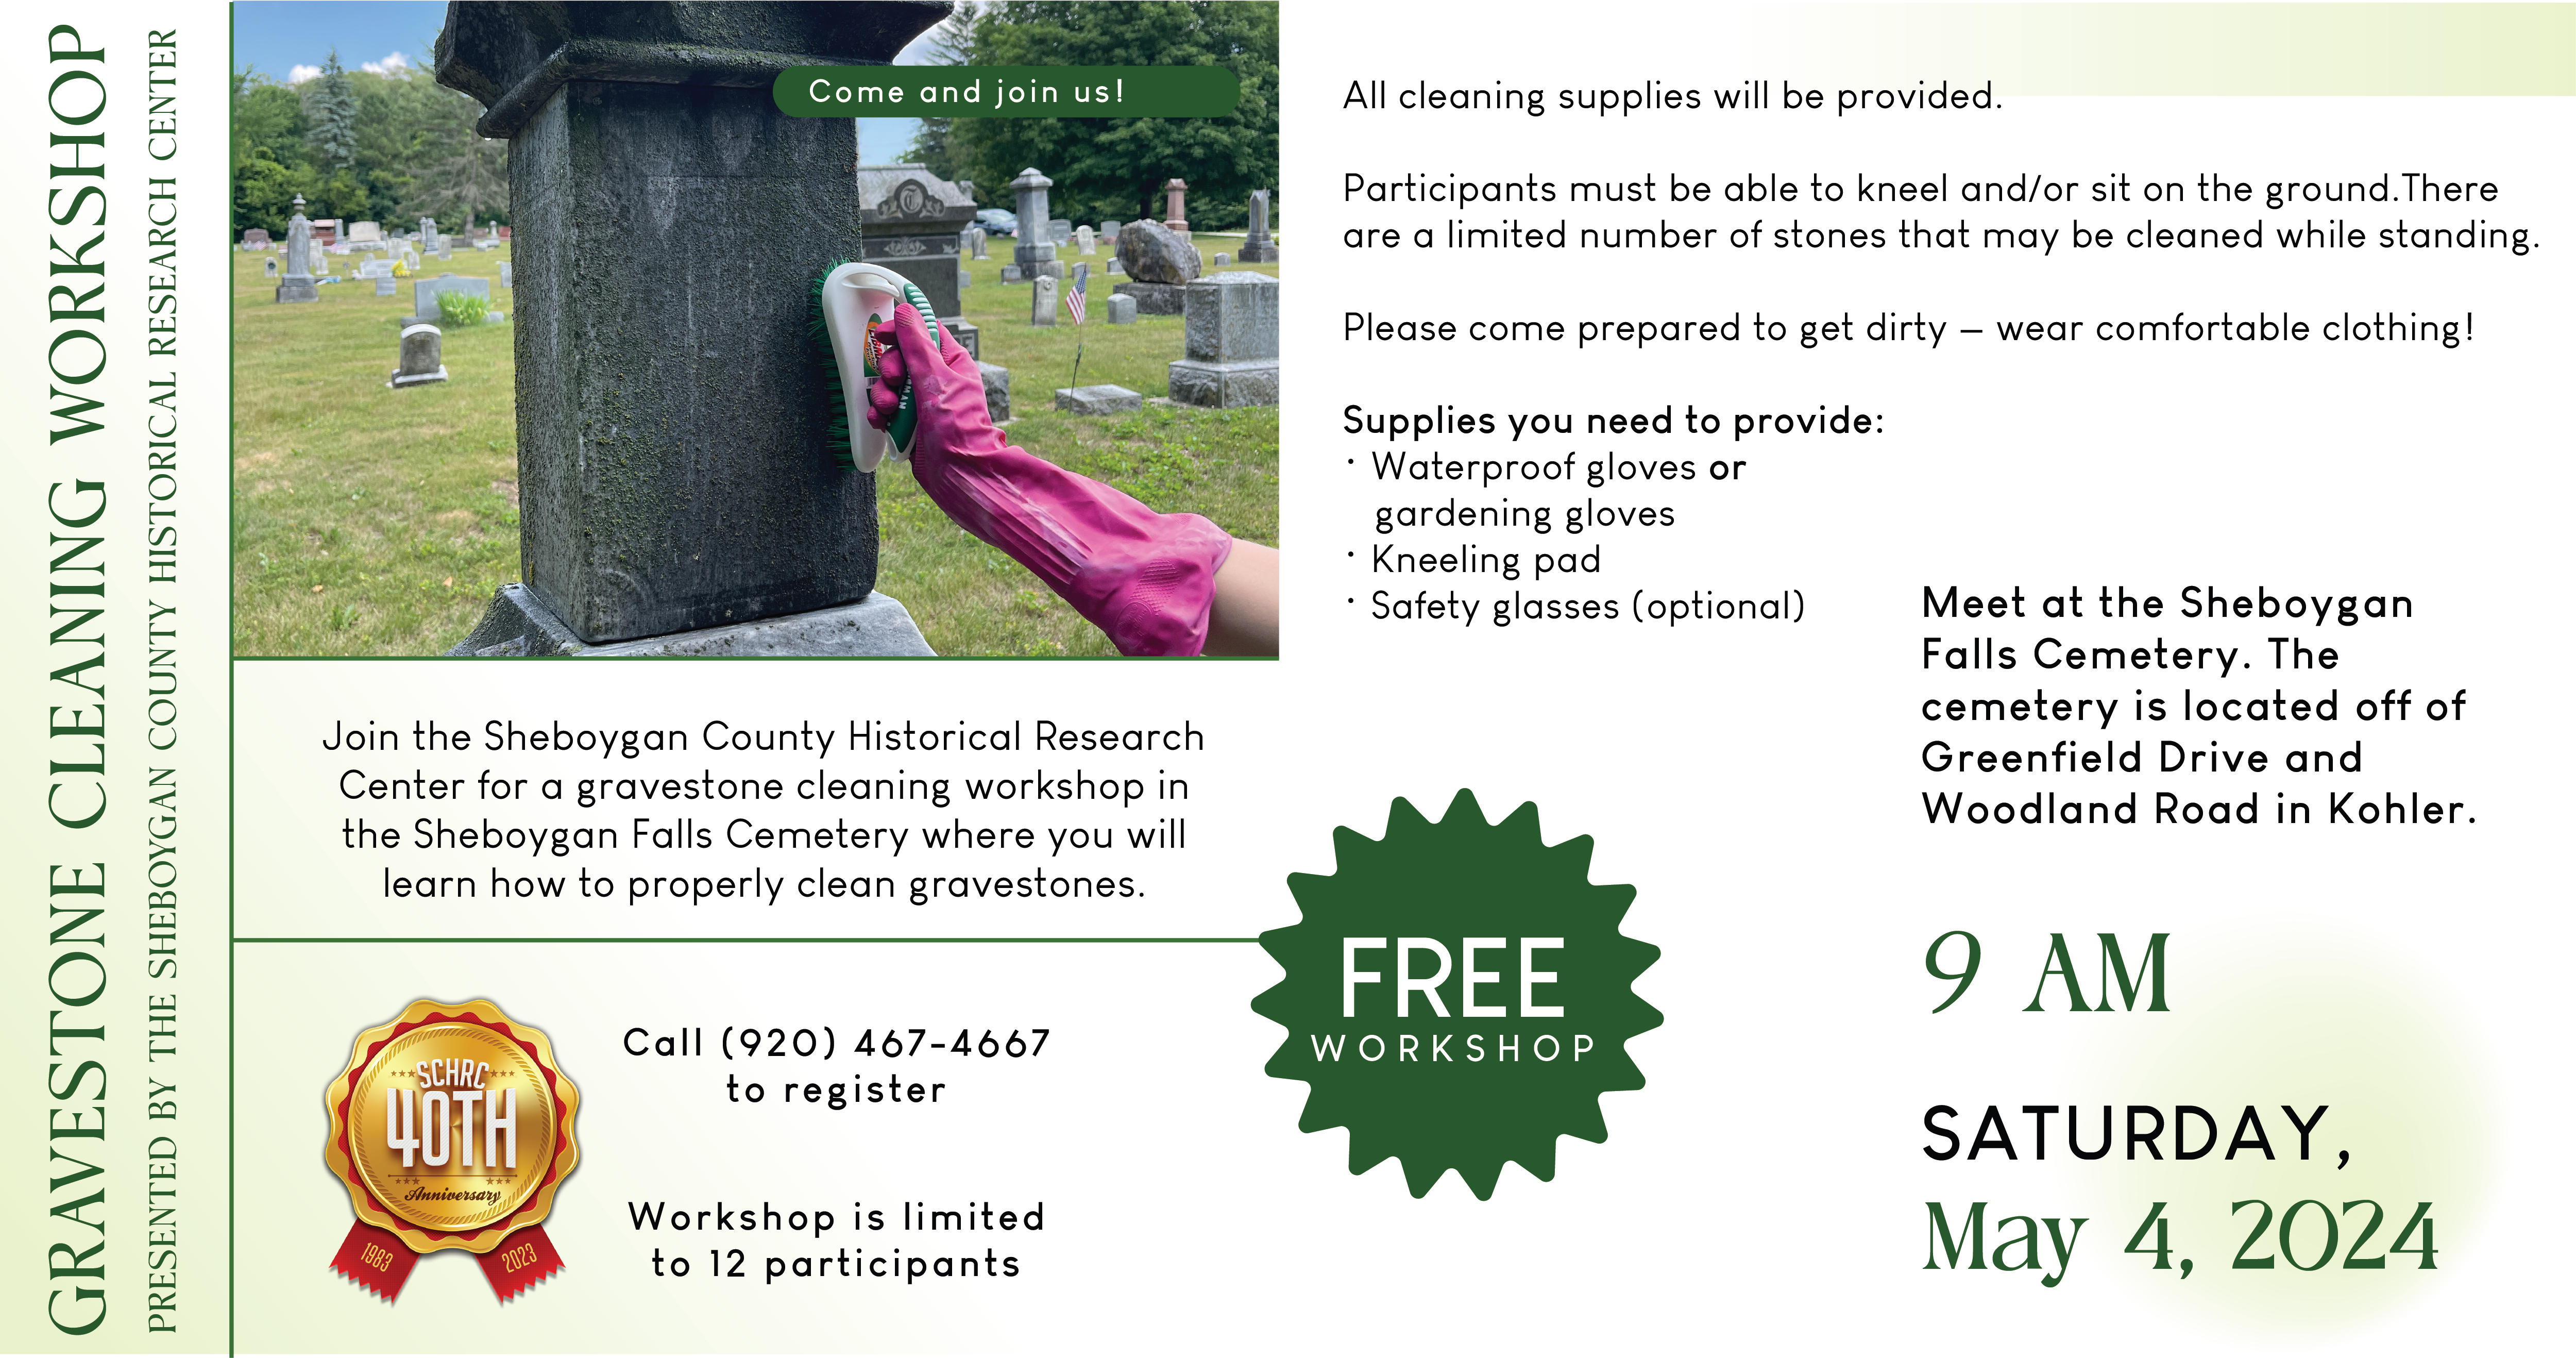 Gravestone cleaning workshop May 4 at the Sheboygan Falls Cemetery